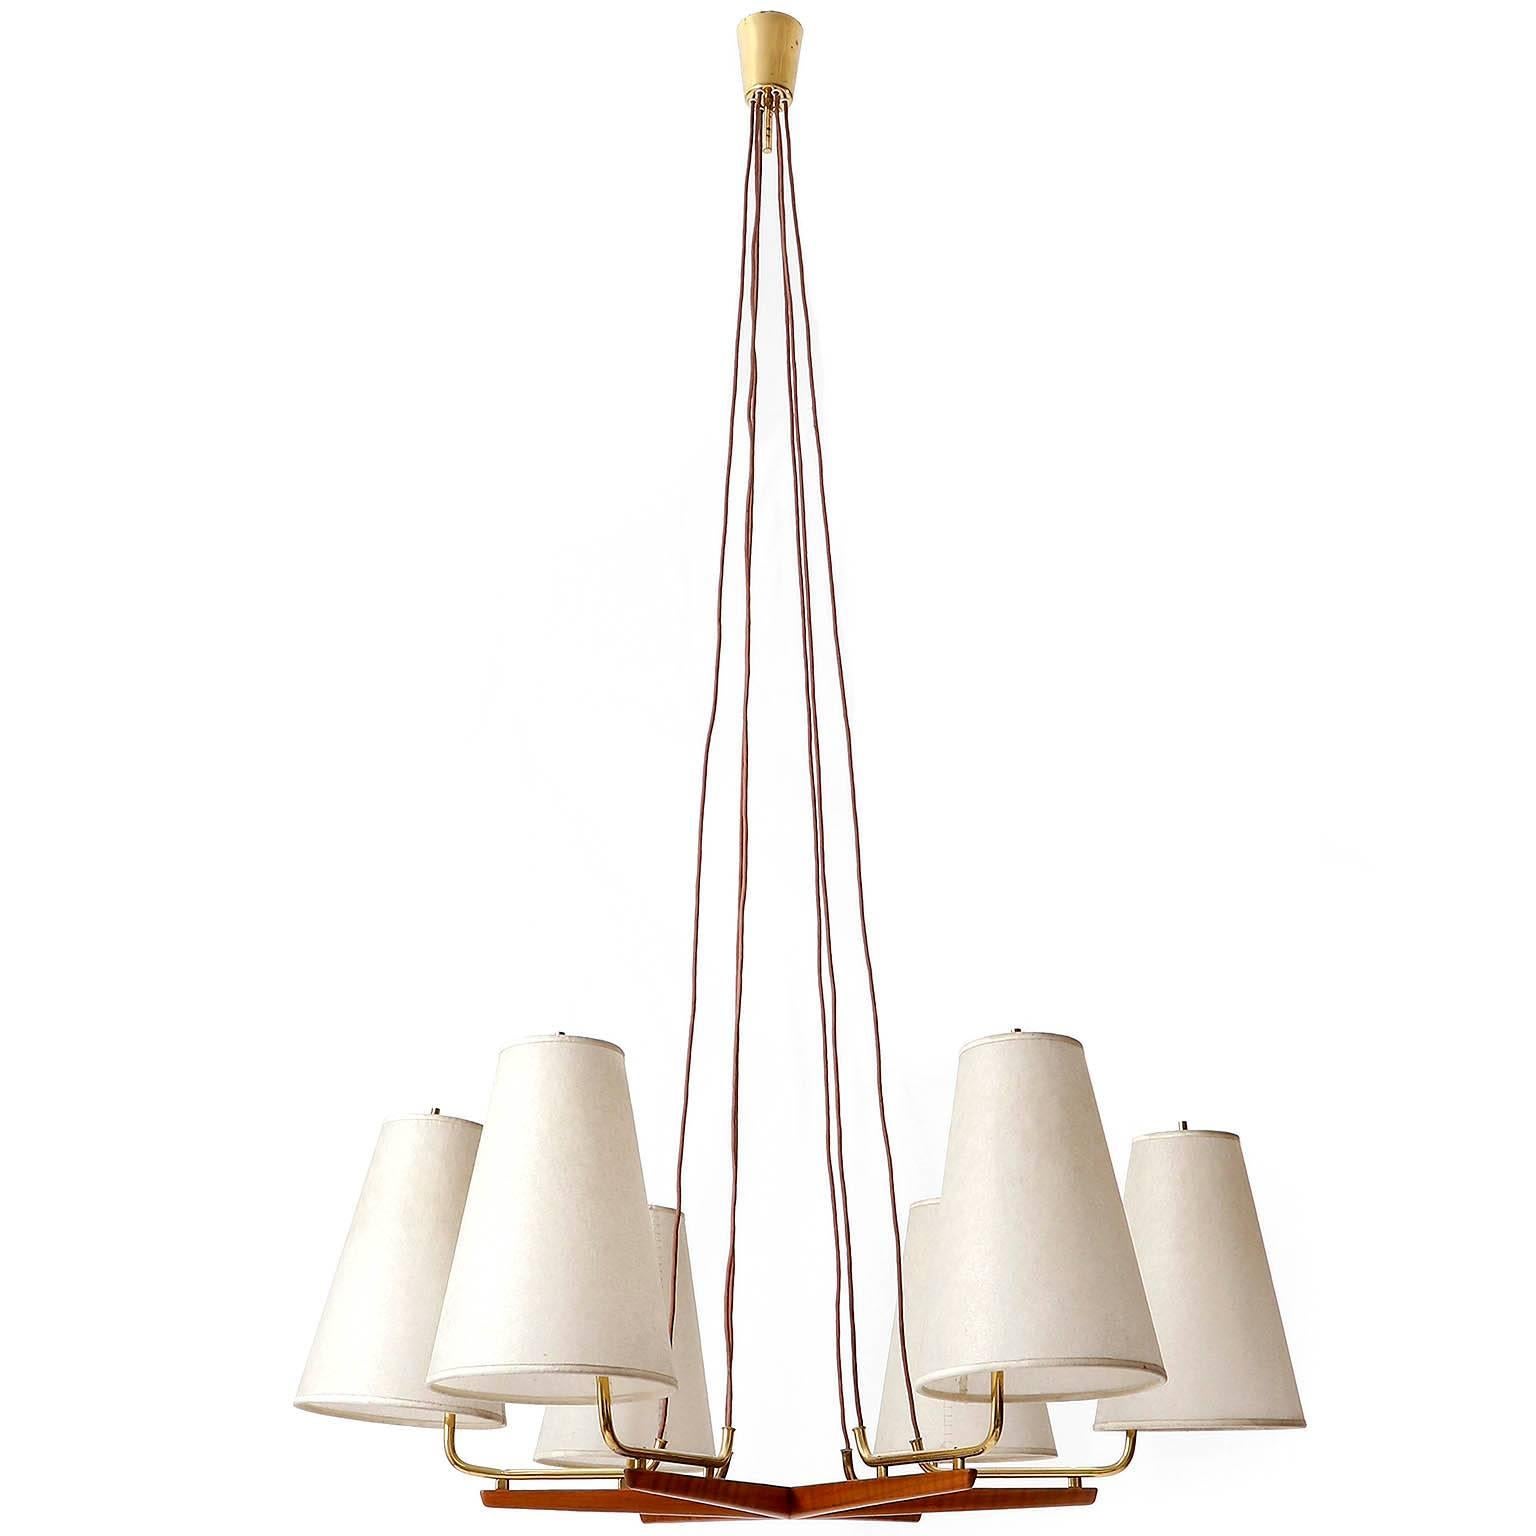 A large pendant lamp model no. 3652/6 'Holzstern' (engl. wood star) by J.T. Kalmar, Austria, manufactured in Mid-Century, circa 1960. 
This light was produced in 1950s as well as in 1960s and it is documented in the Kalmar catalogues from both